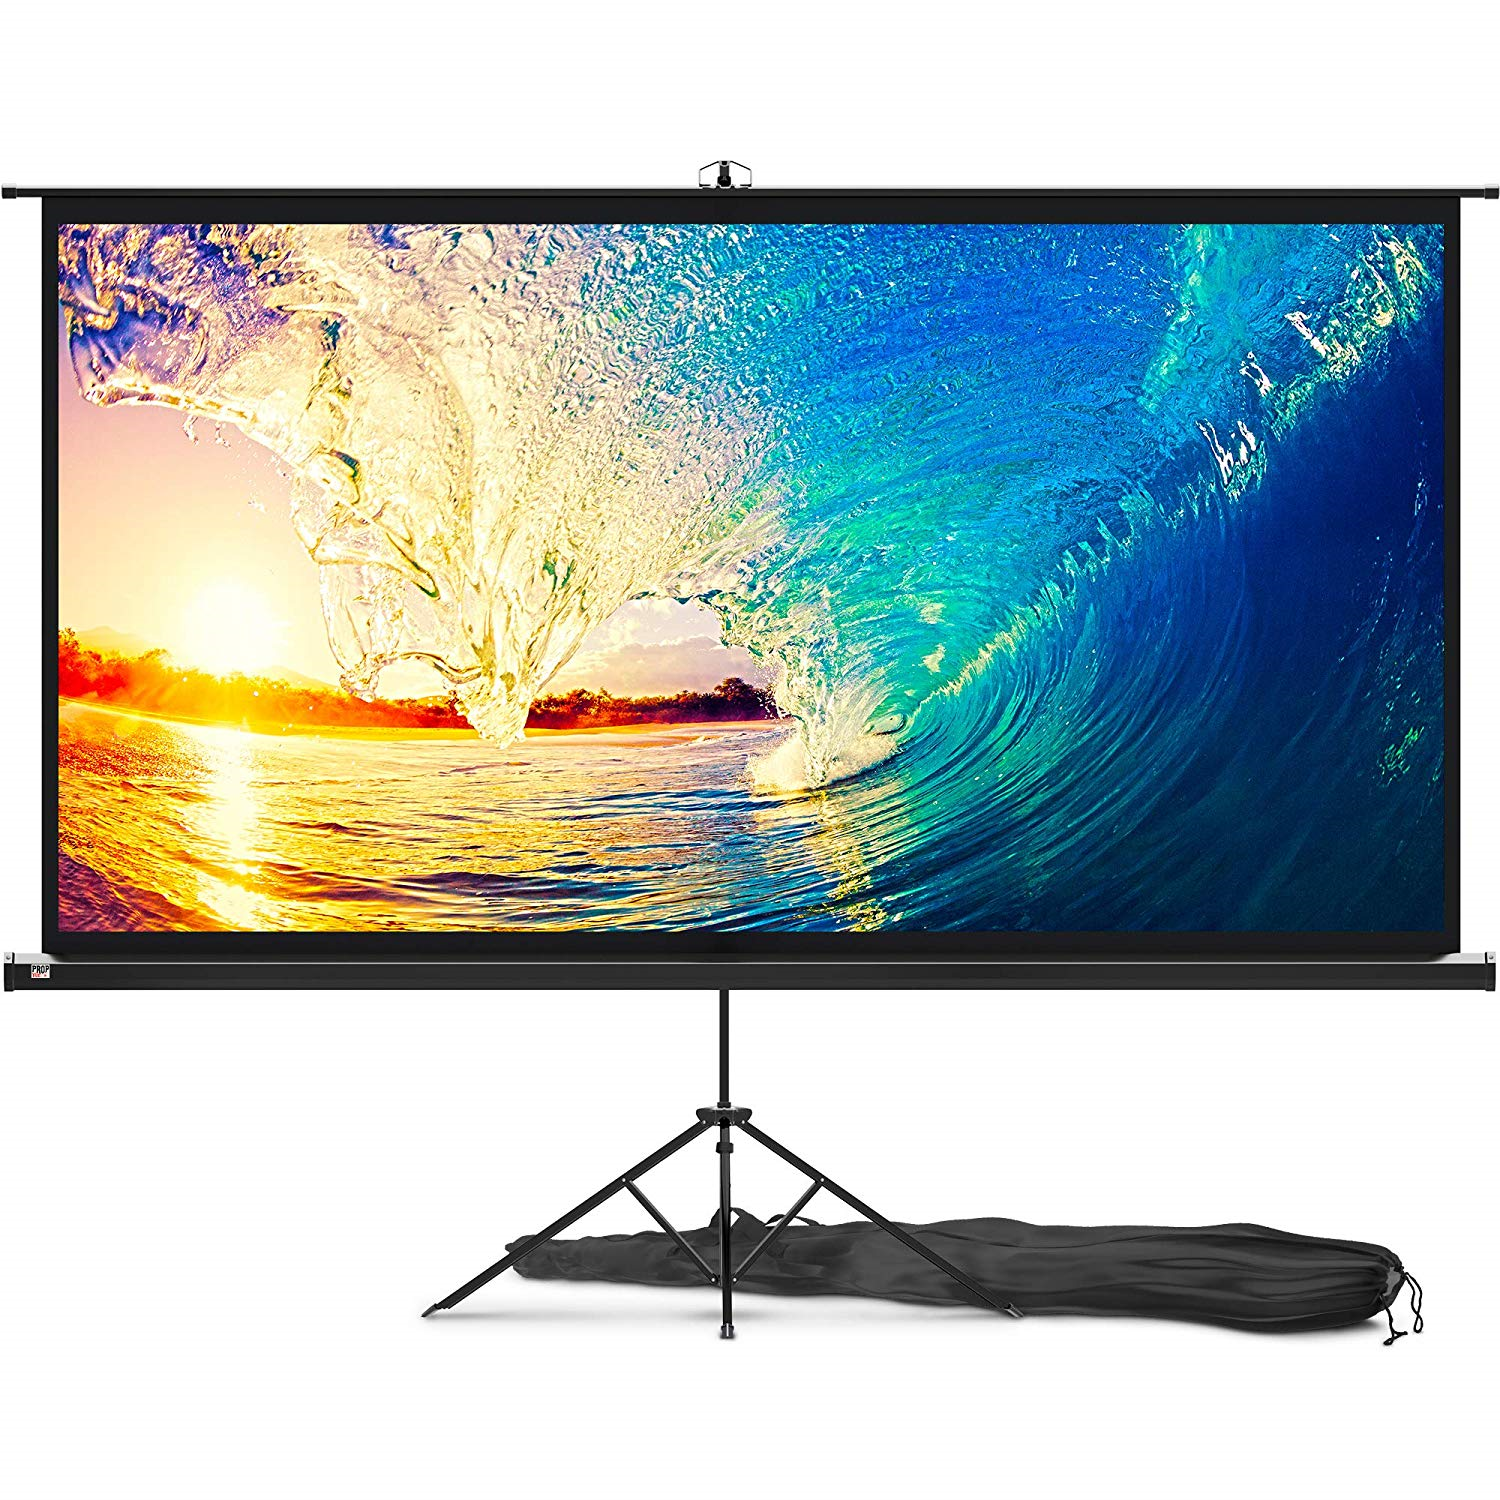 100" Indoor/Outdoor Projector Screen with Tripod Stand